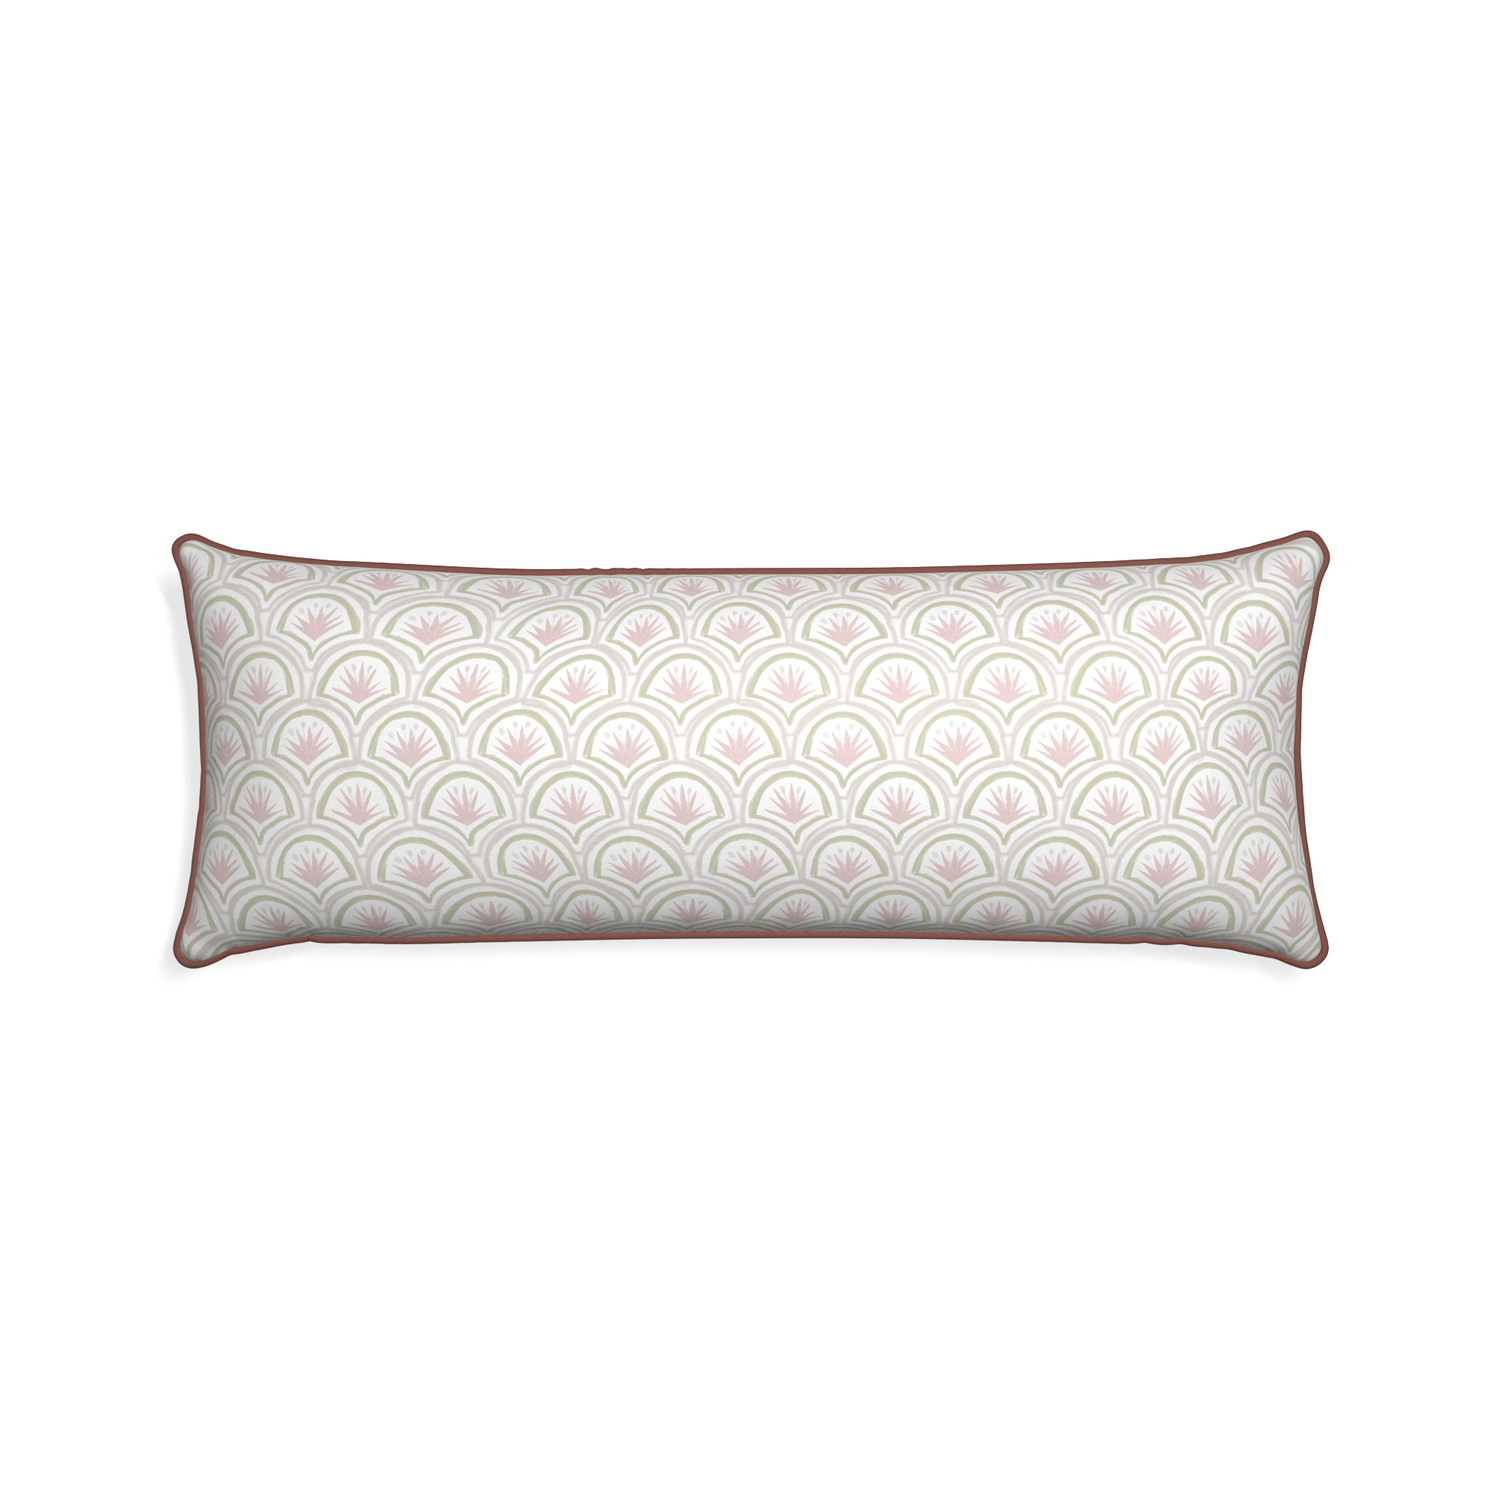 Xl-lumbar thatcher rose custom pillow with w piping on white background